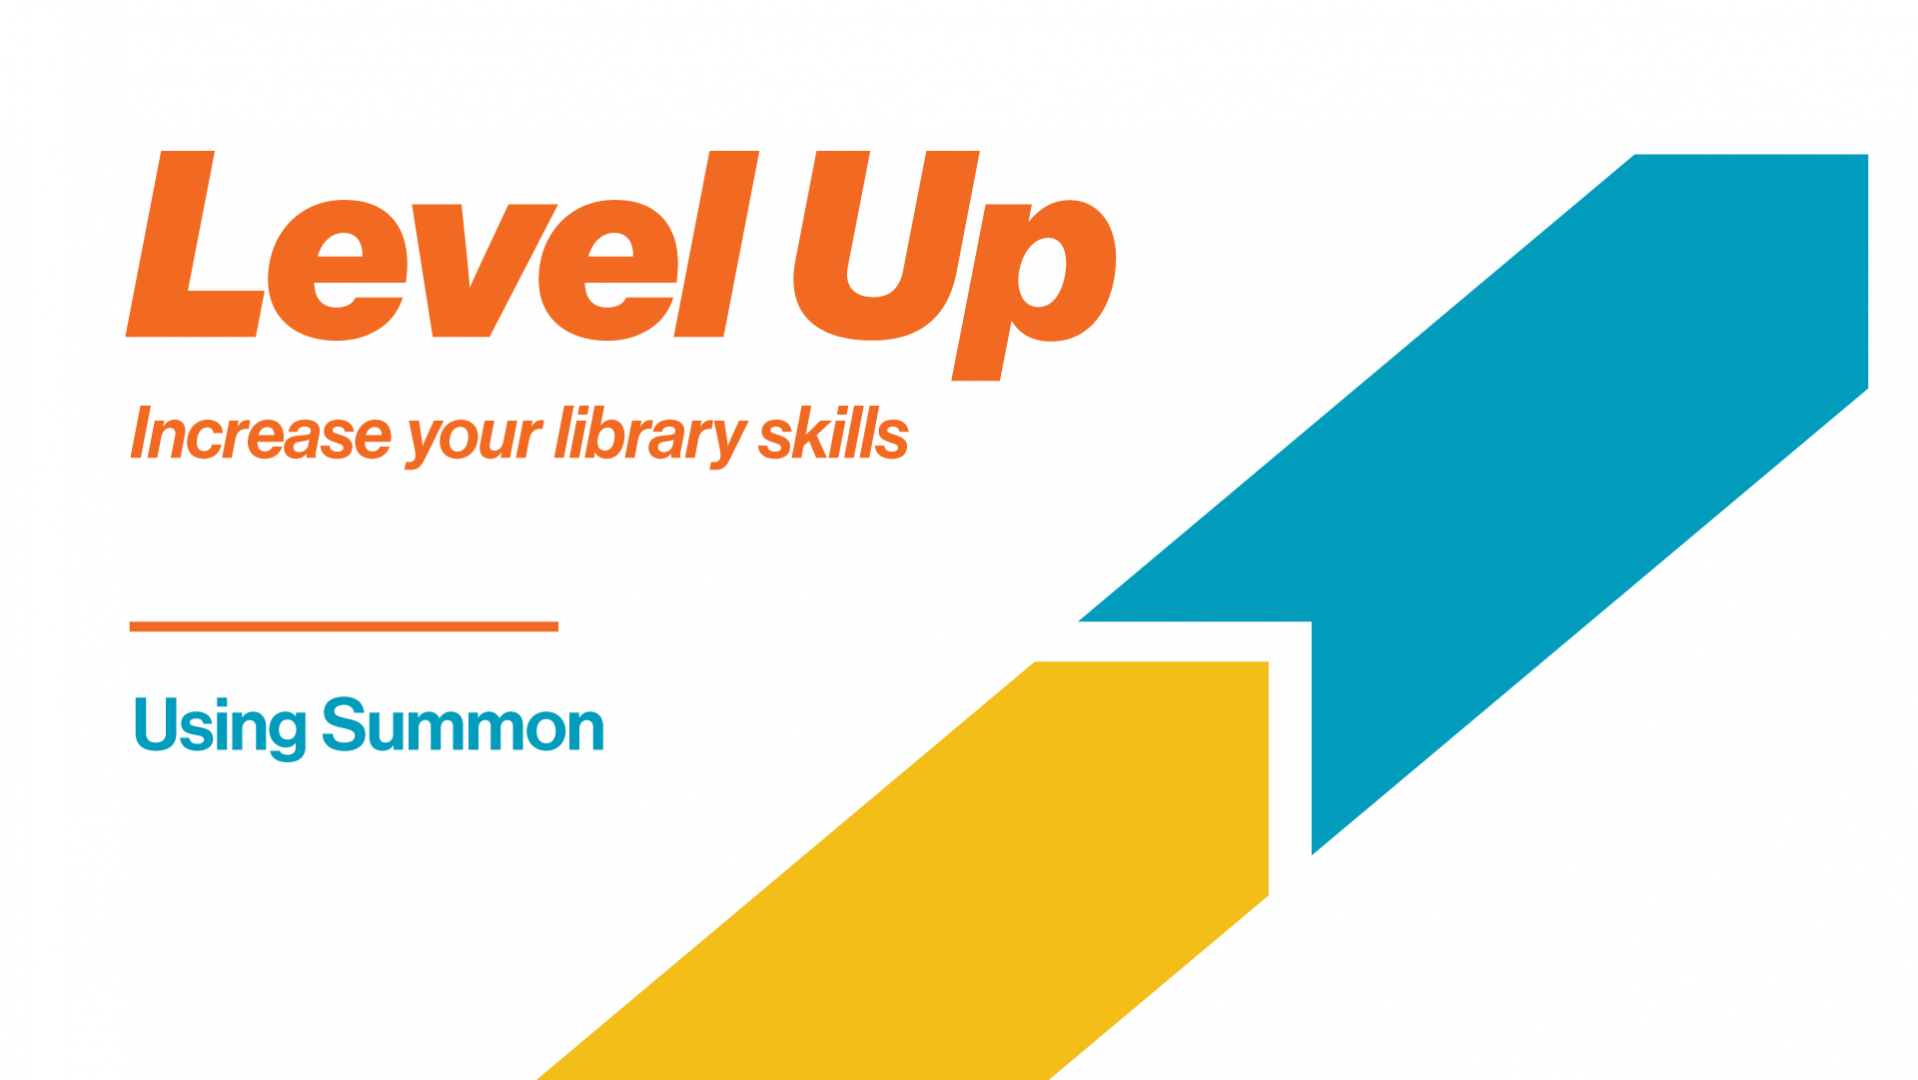 Level up: Increase your library skills using Summon